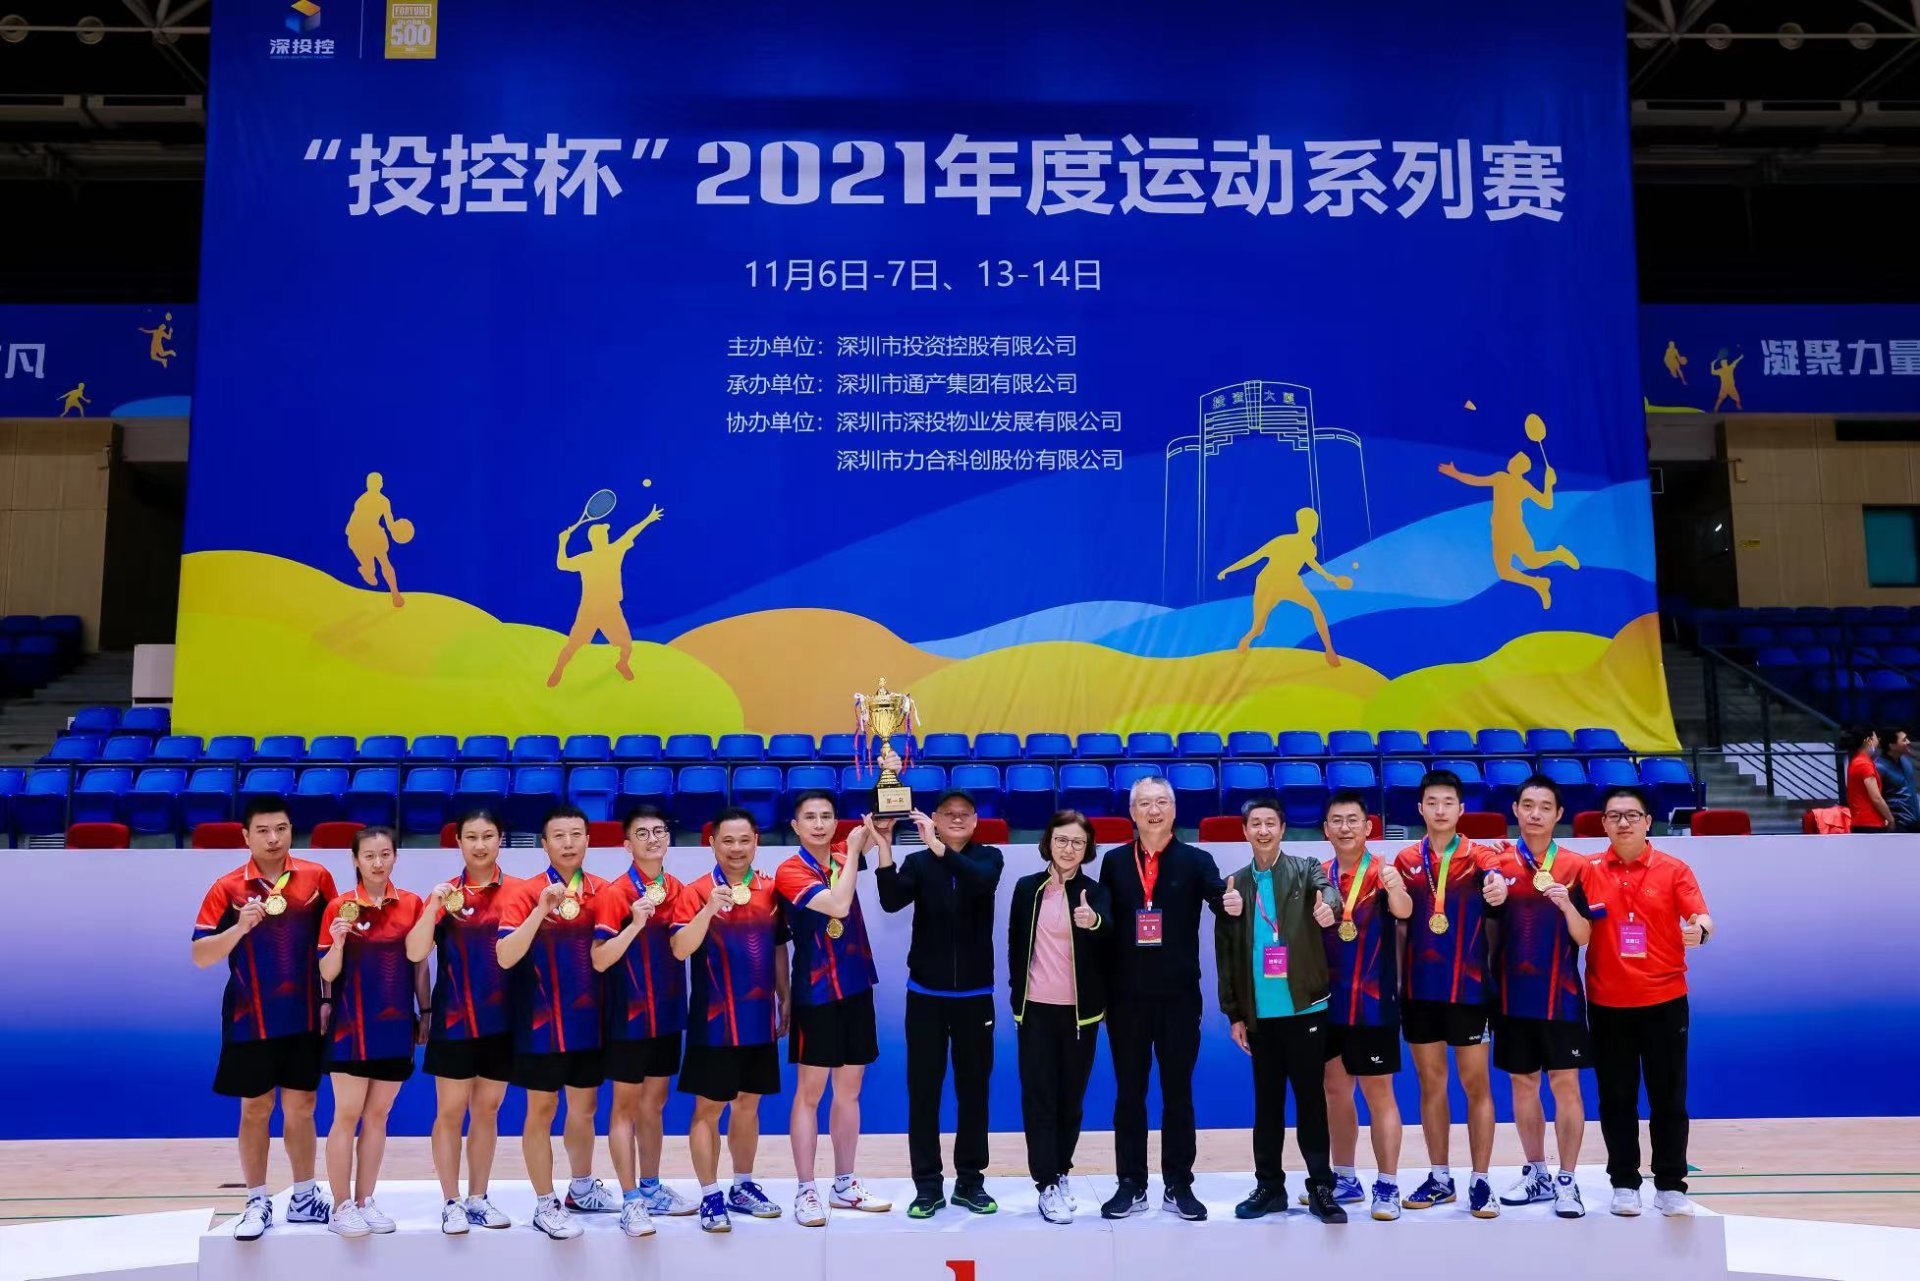 Investment Control Cup - 2021 Sports Series Presents the 100th Anniversary of the Founding of the Communist Party of China